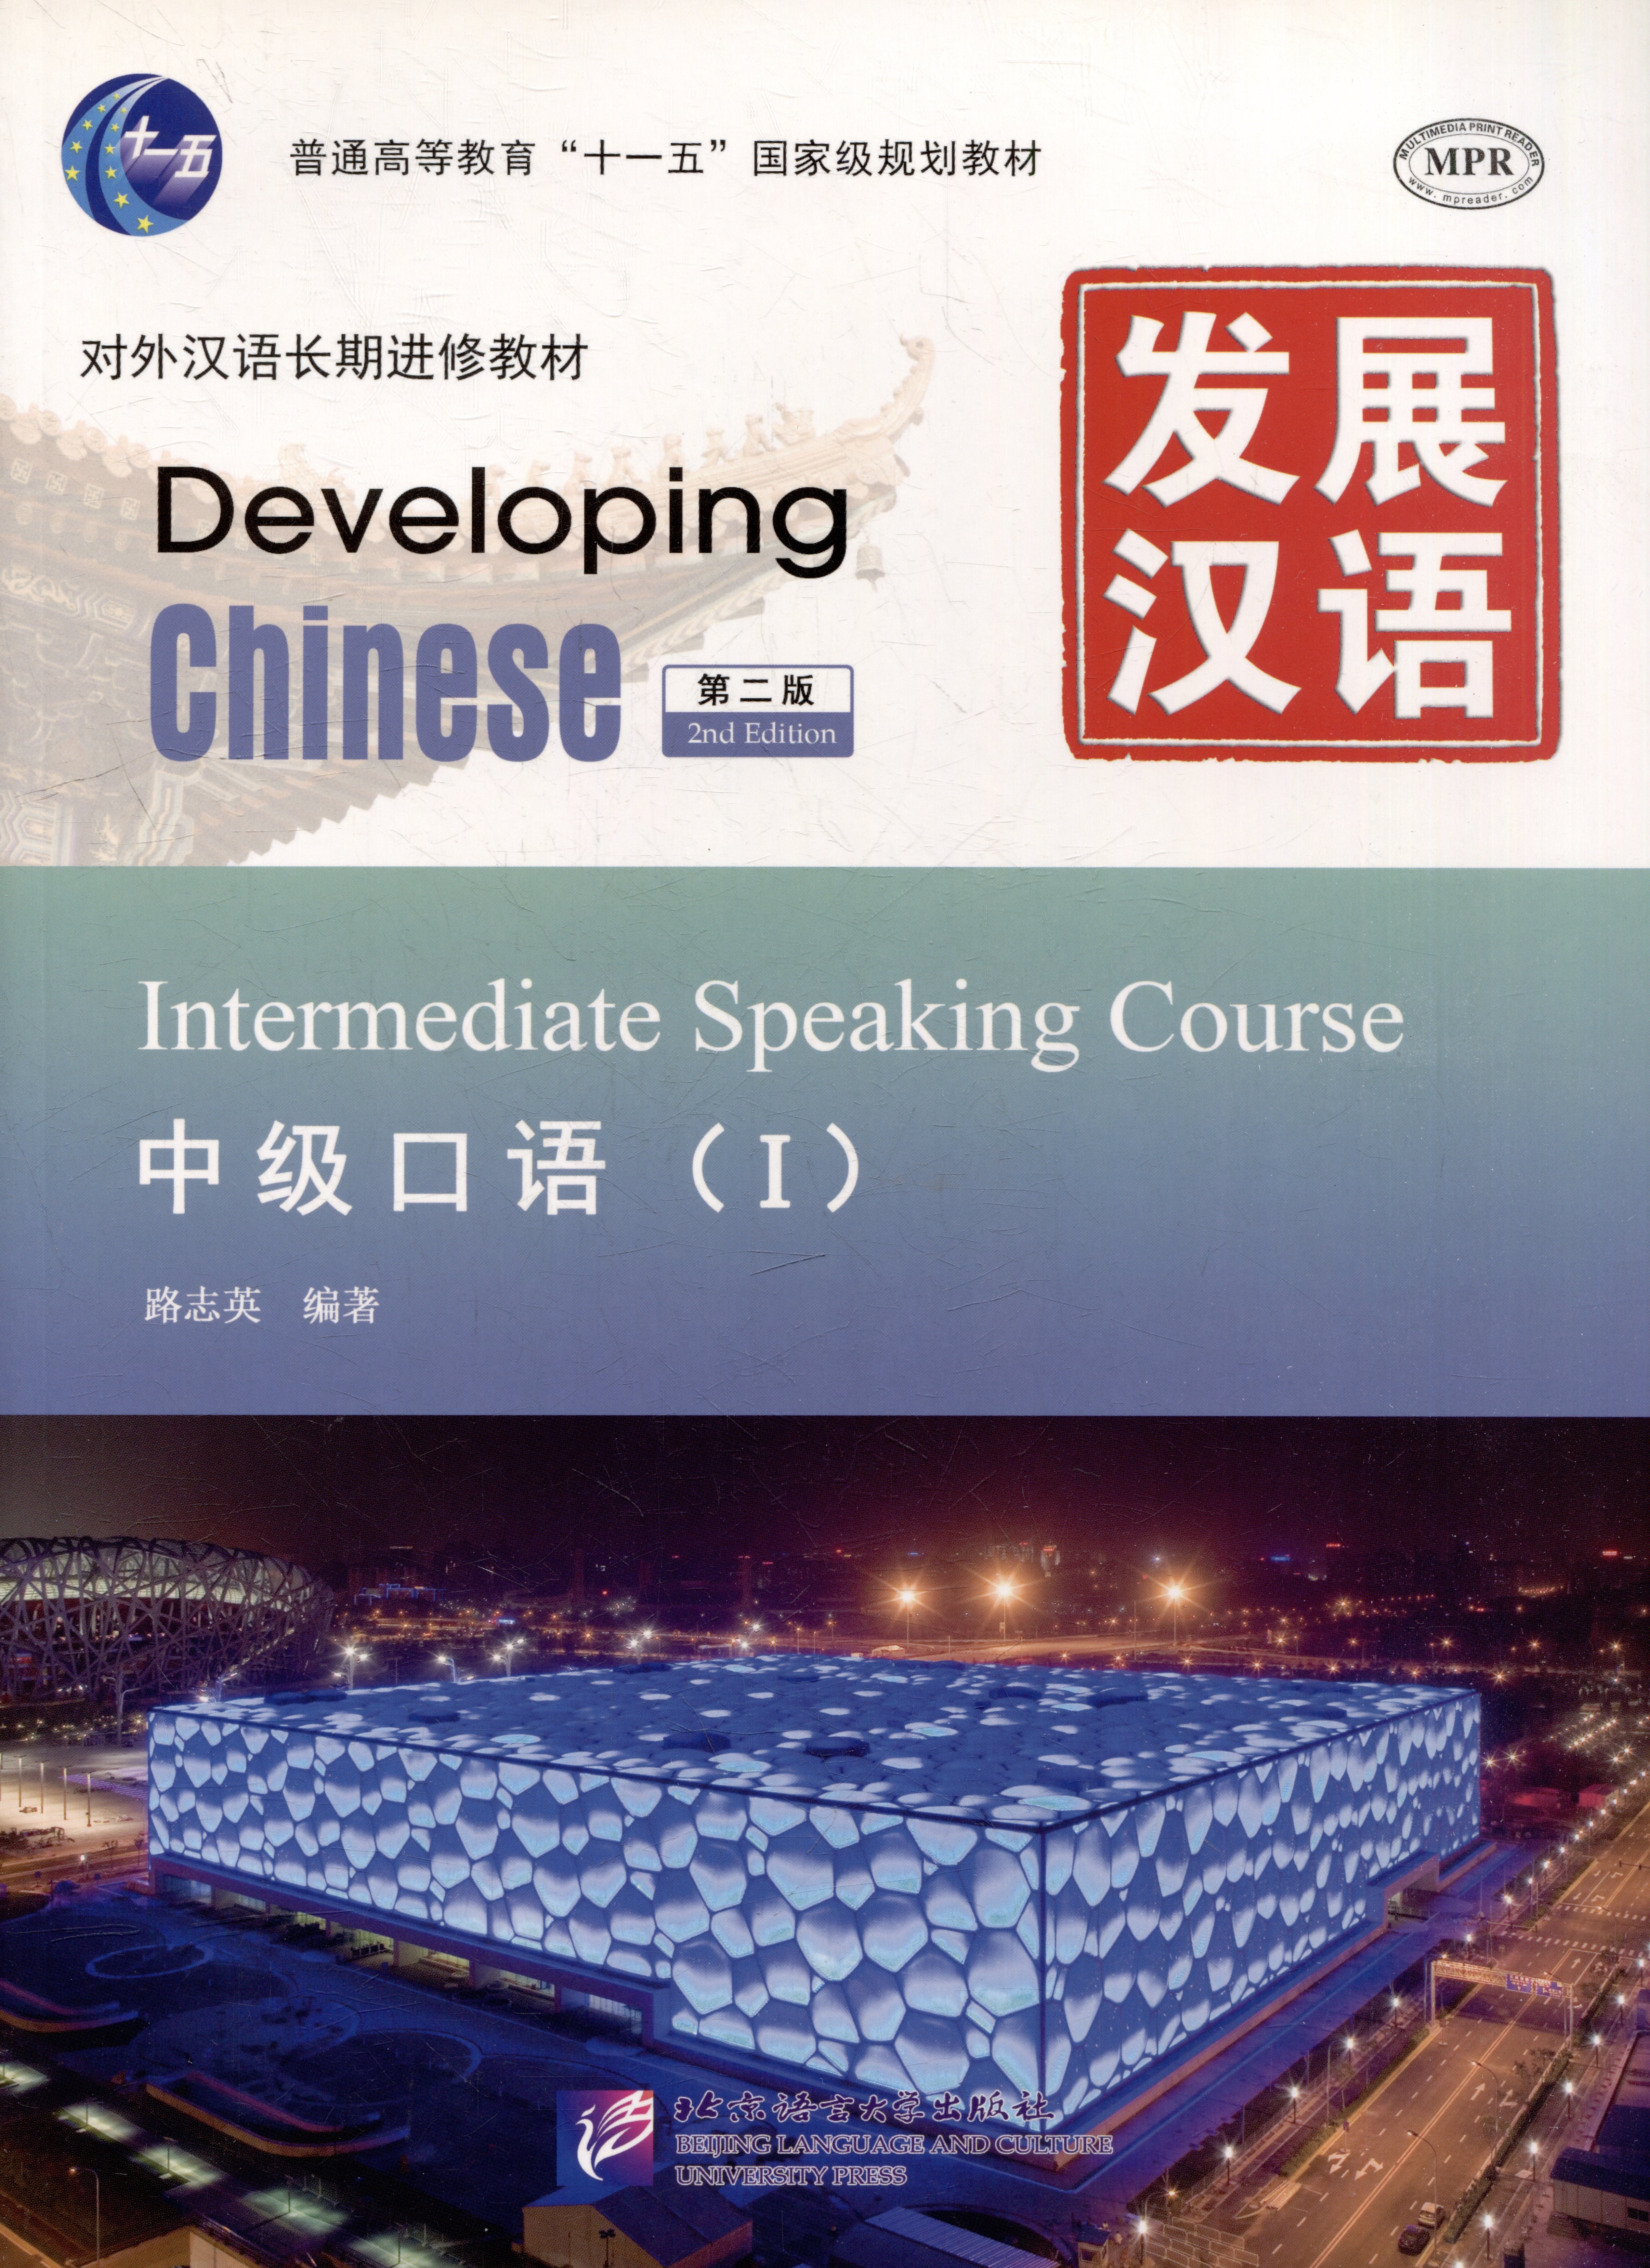  - Developing Chinese (2nd Edition) Intermediate Speaking Course I